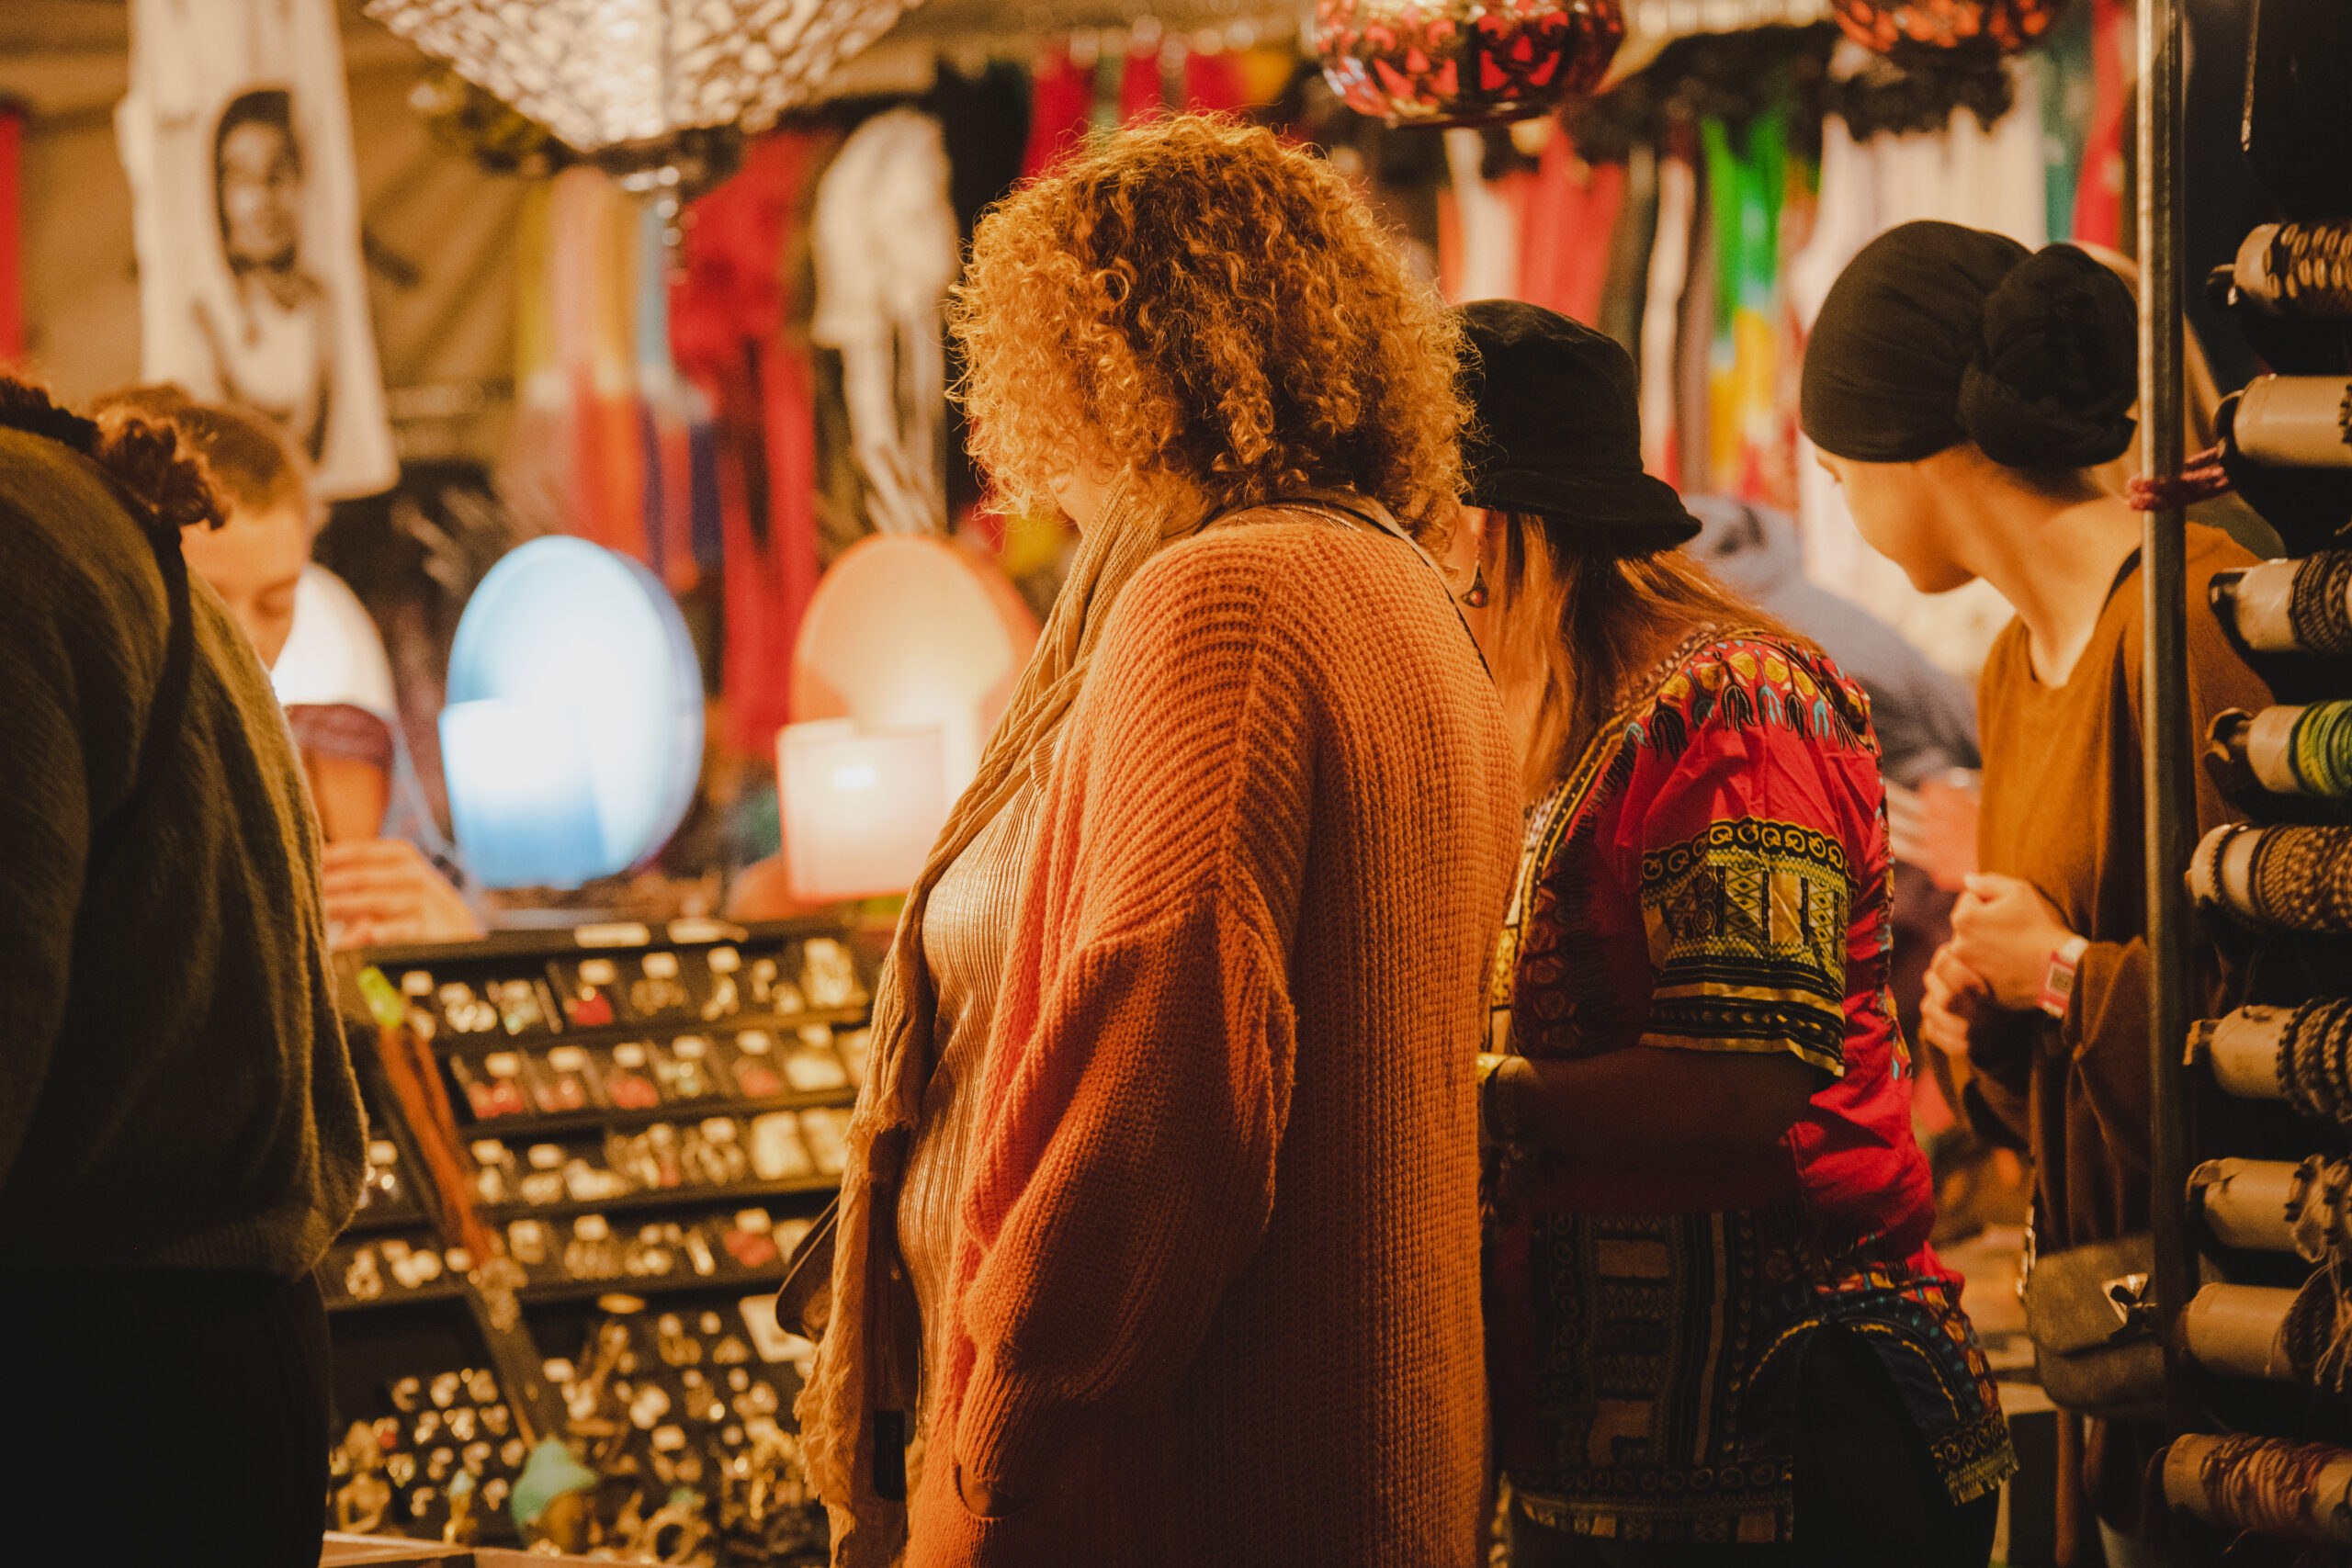 Where to find the Reggae Market